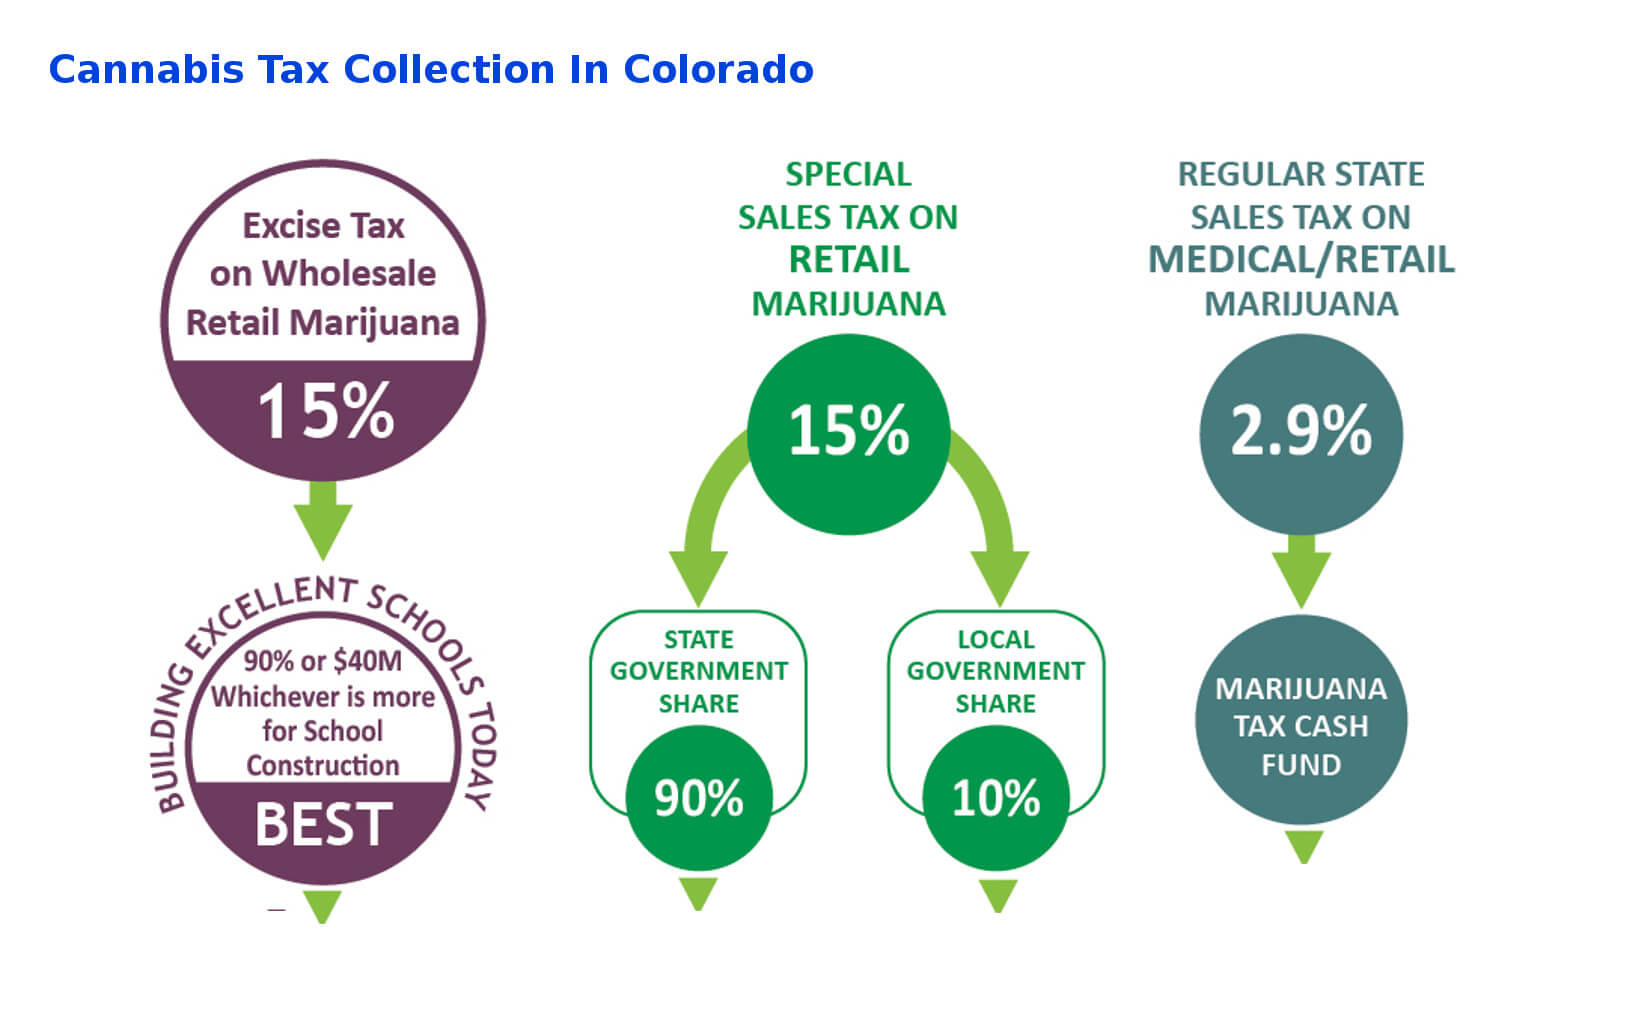 Taxes From Cannabis in Colorado